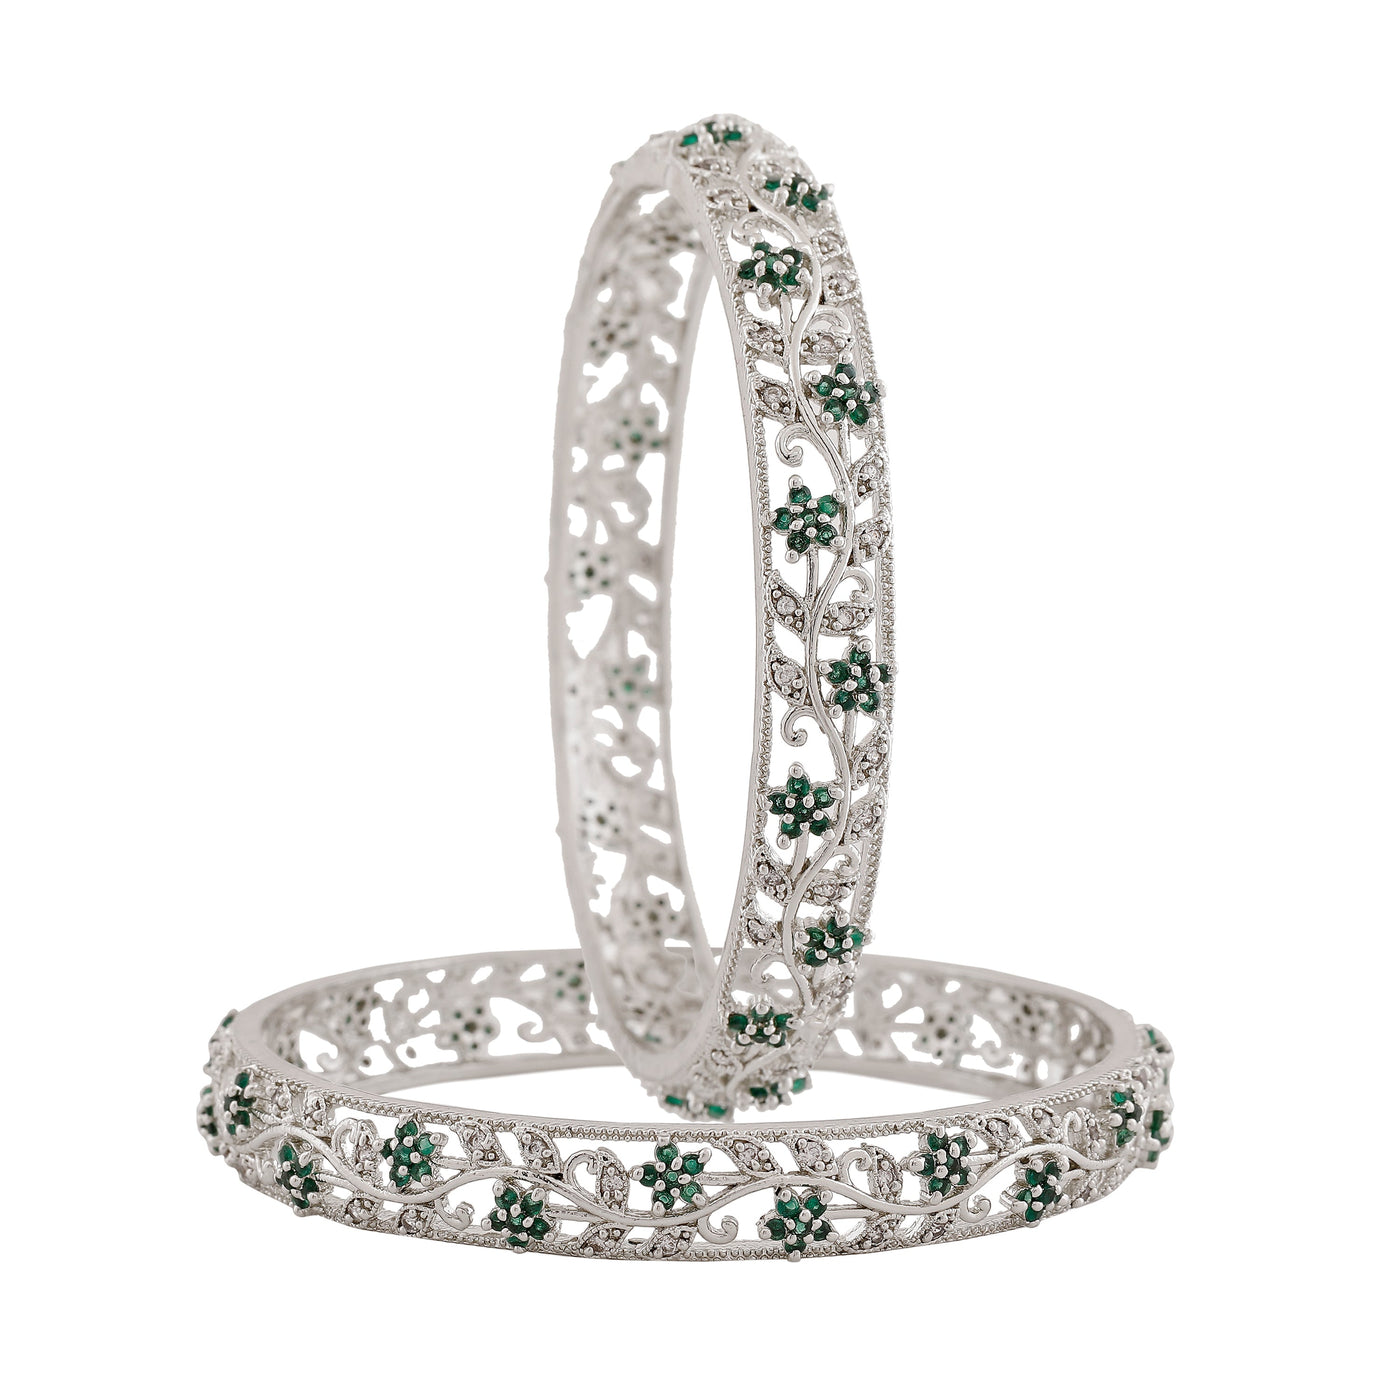 Estele Rhodium Plated CZ Flower Designer Bangles with Green Crystals for Women